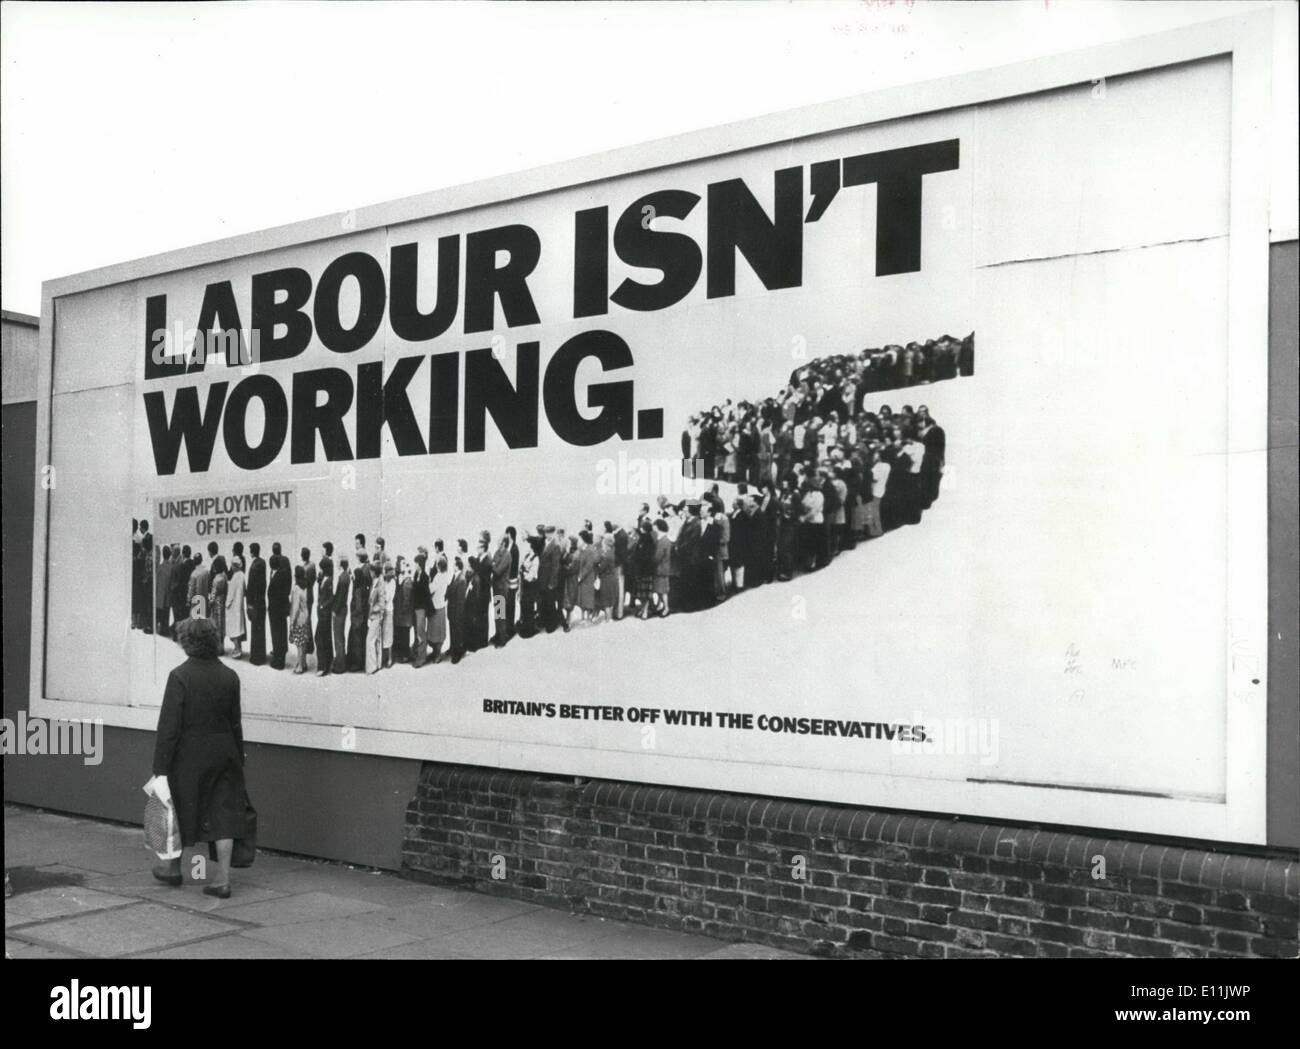 Aug. 08, 1978 - Conservative Poster Upsets Labour The Conservative poster ''Labour Isn't Working'' thought up by the two brothers Morris and Charles Saatchi, has infuriated the Prime Minister Jim Callaghan and the Chancellor Denis Healey. The Chancellor, in speech accused the Tories of hiring the Advertising agency Saatchi, and Saatchi, to ''sell Mrs. Thatcher as if she was a soap powder''. The Labour also accused the Tories of spending about two million on pre-election advertising. Stock Photo